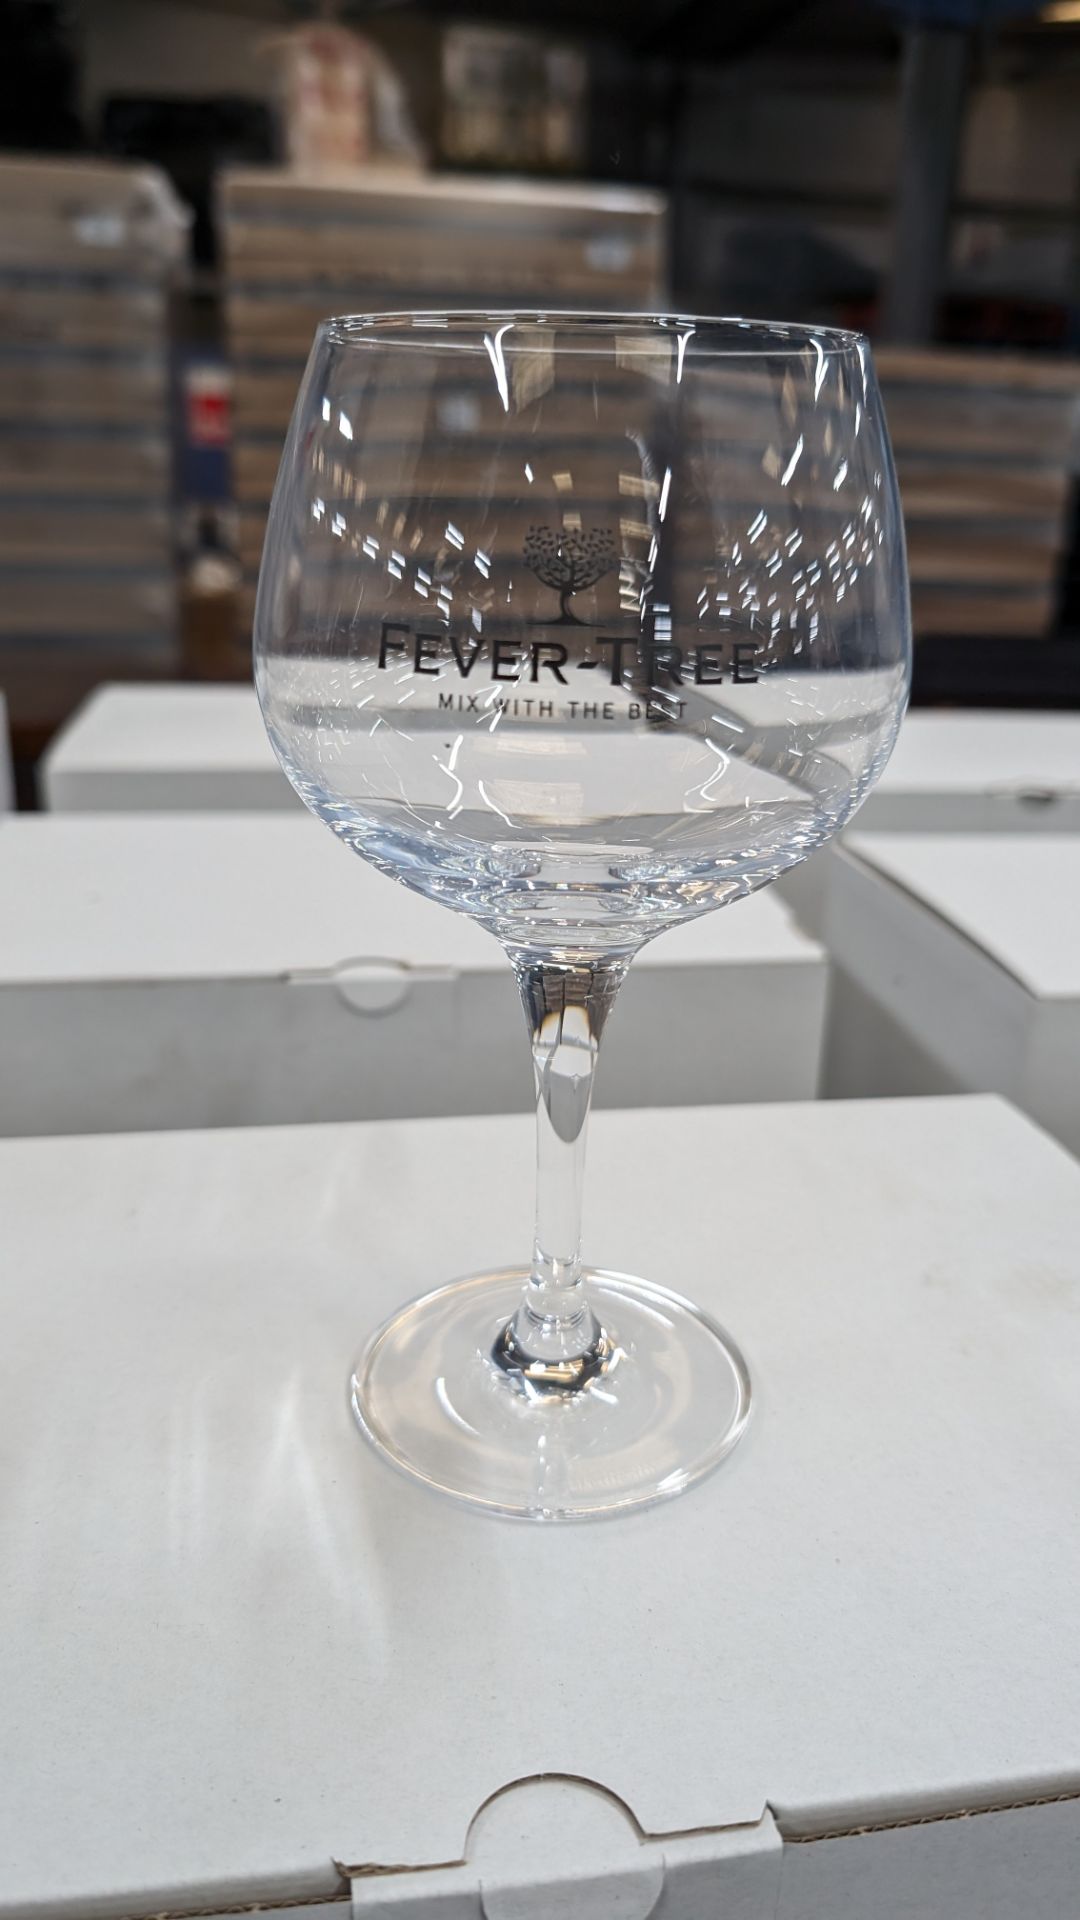 36 off Fever-Tree branded gin & tonic glasses comprising 6 boxes each with 6 glasses - Image 5 of 5